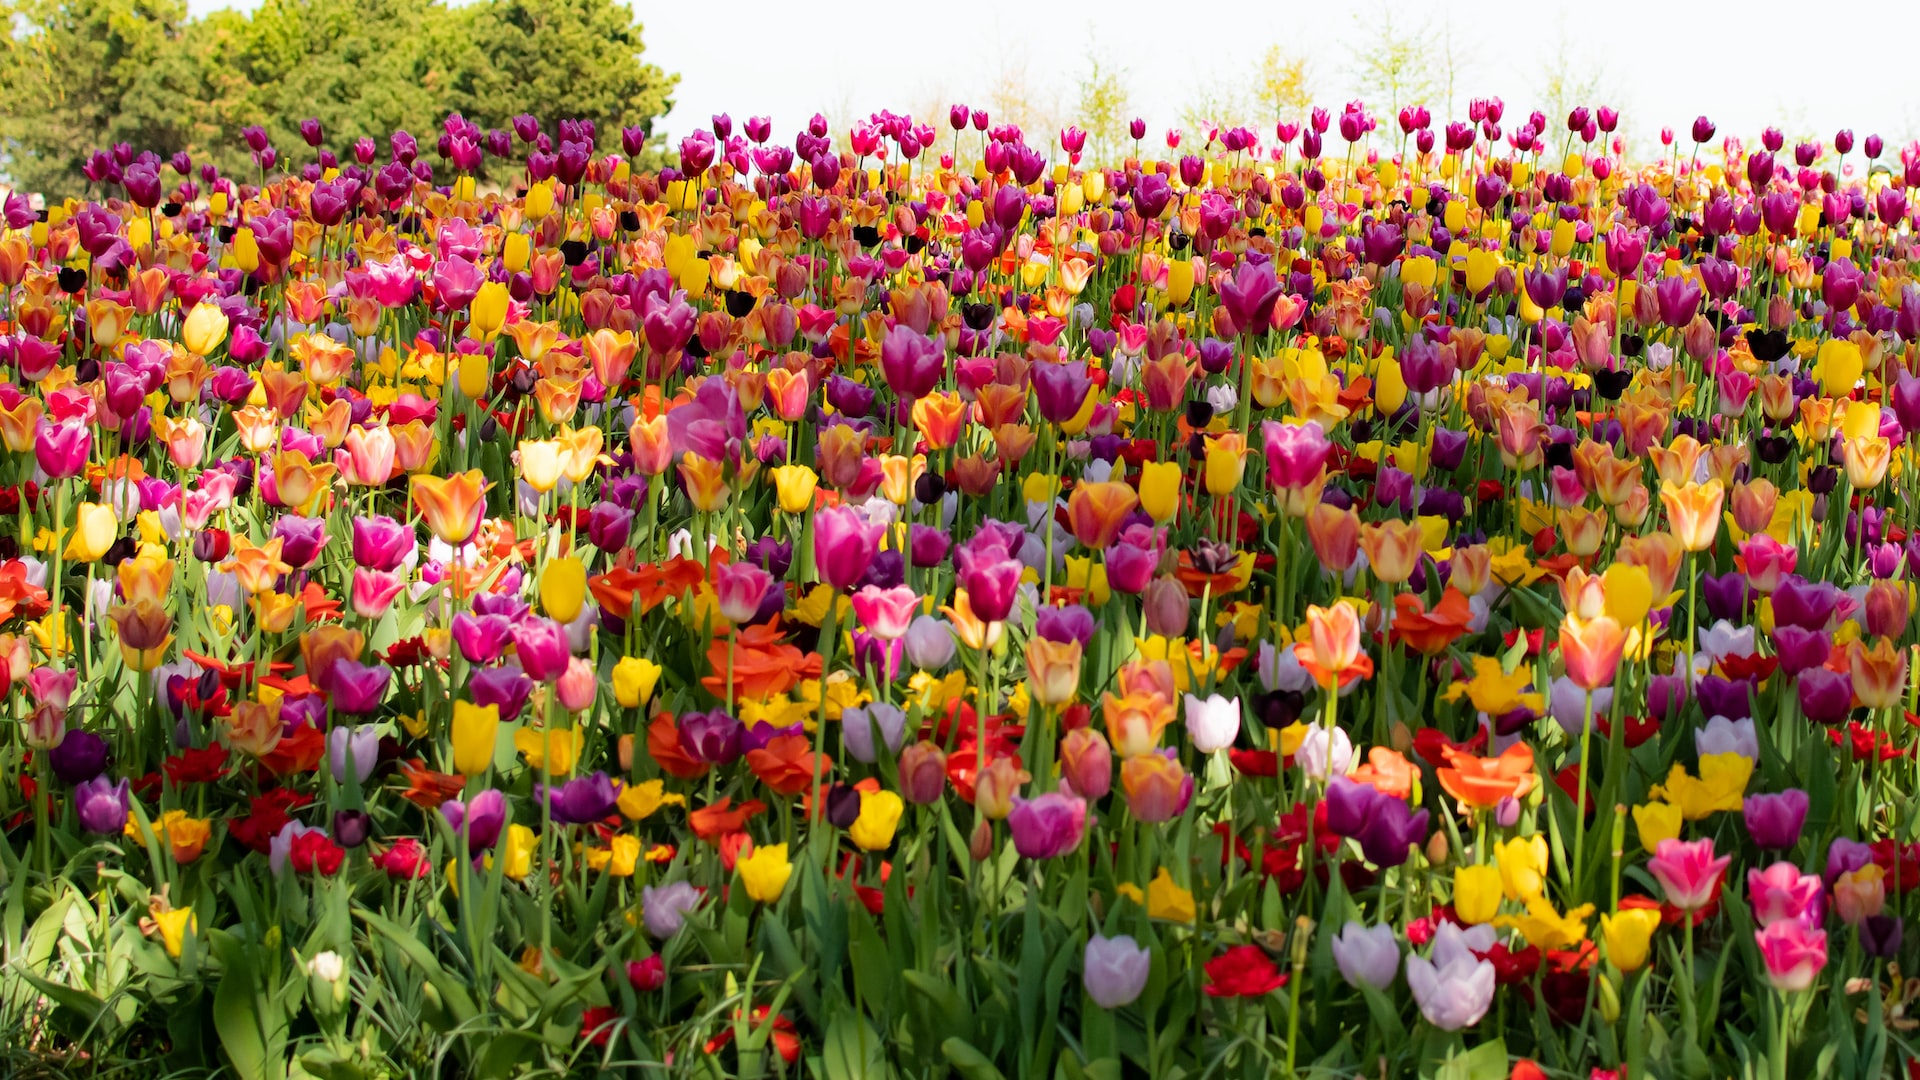 7 Places to See Beautiful Flowers in Full Bloom this Spring